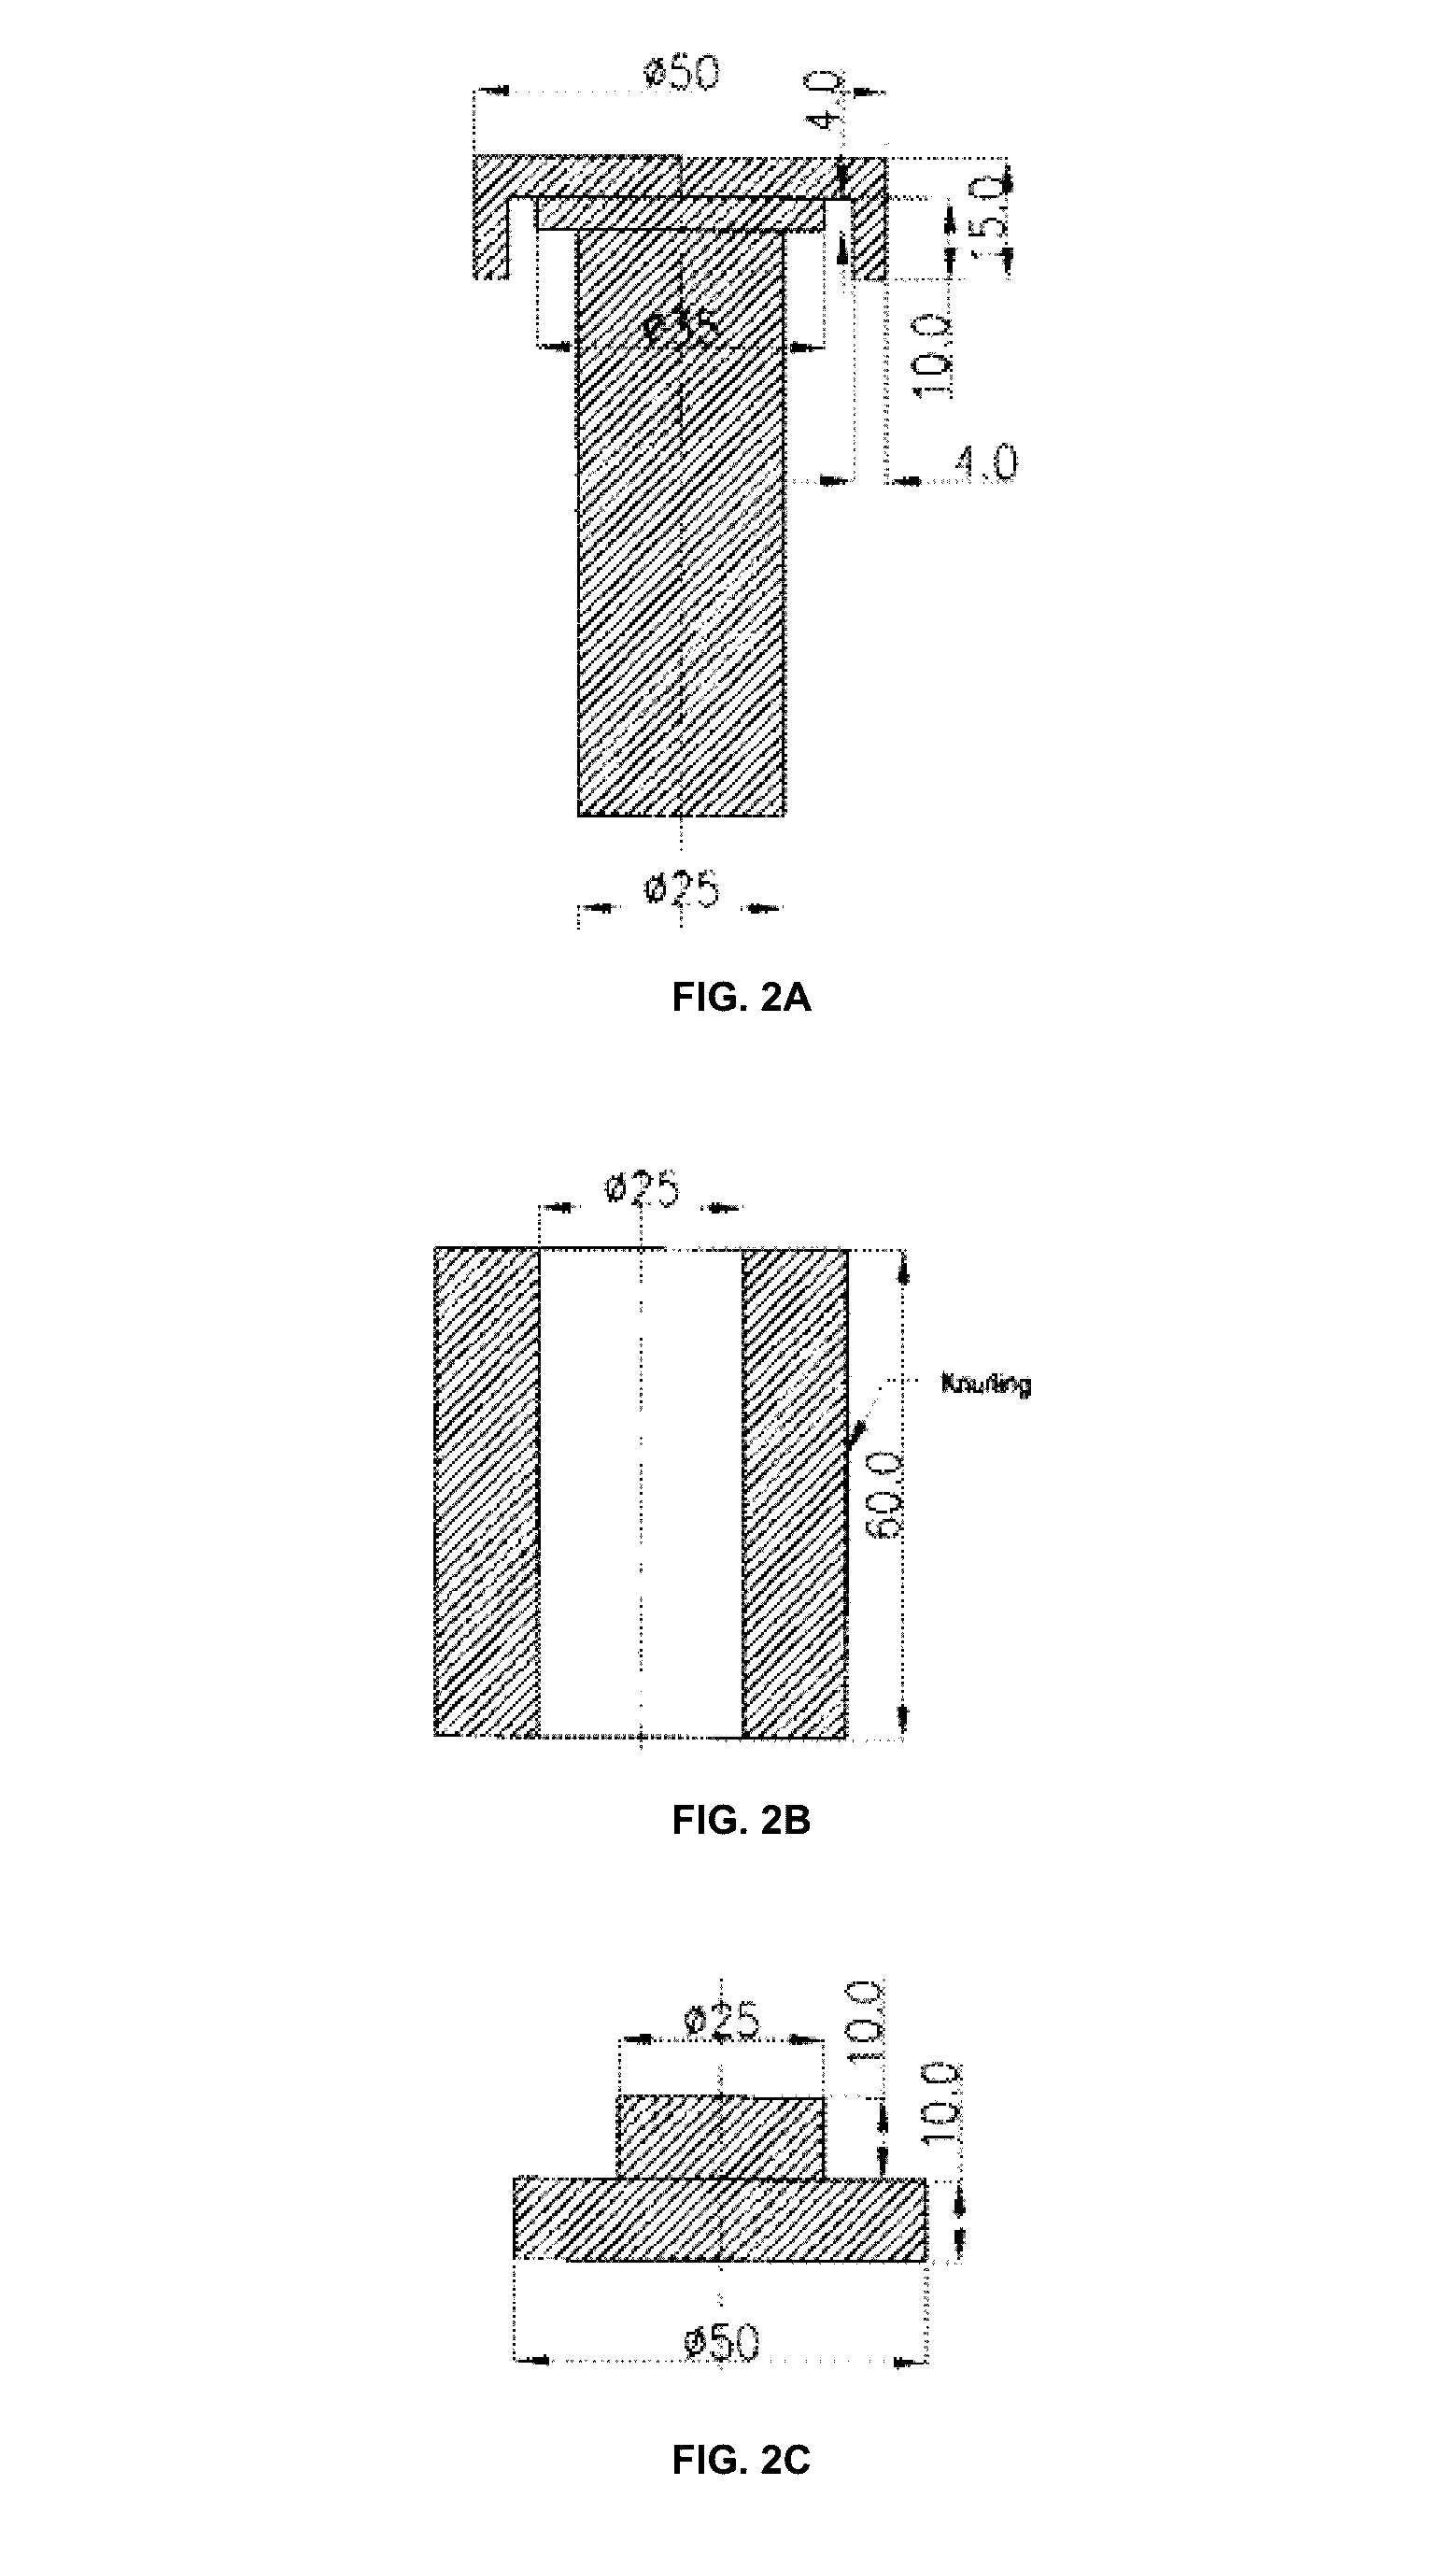 Method for large scale synthesis of optically stimulated luminescence grade polycrystalline ceramic material